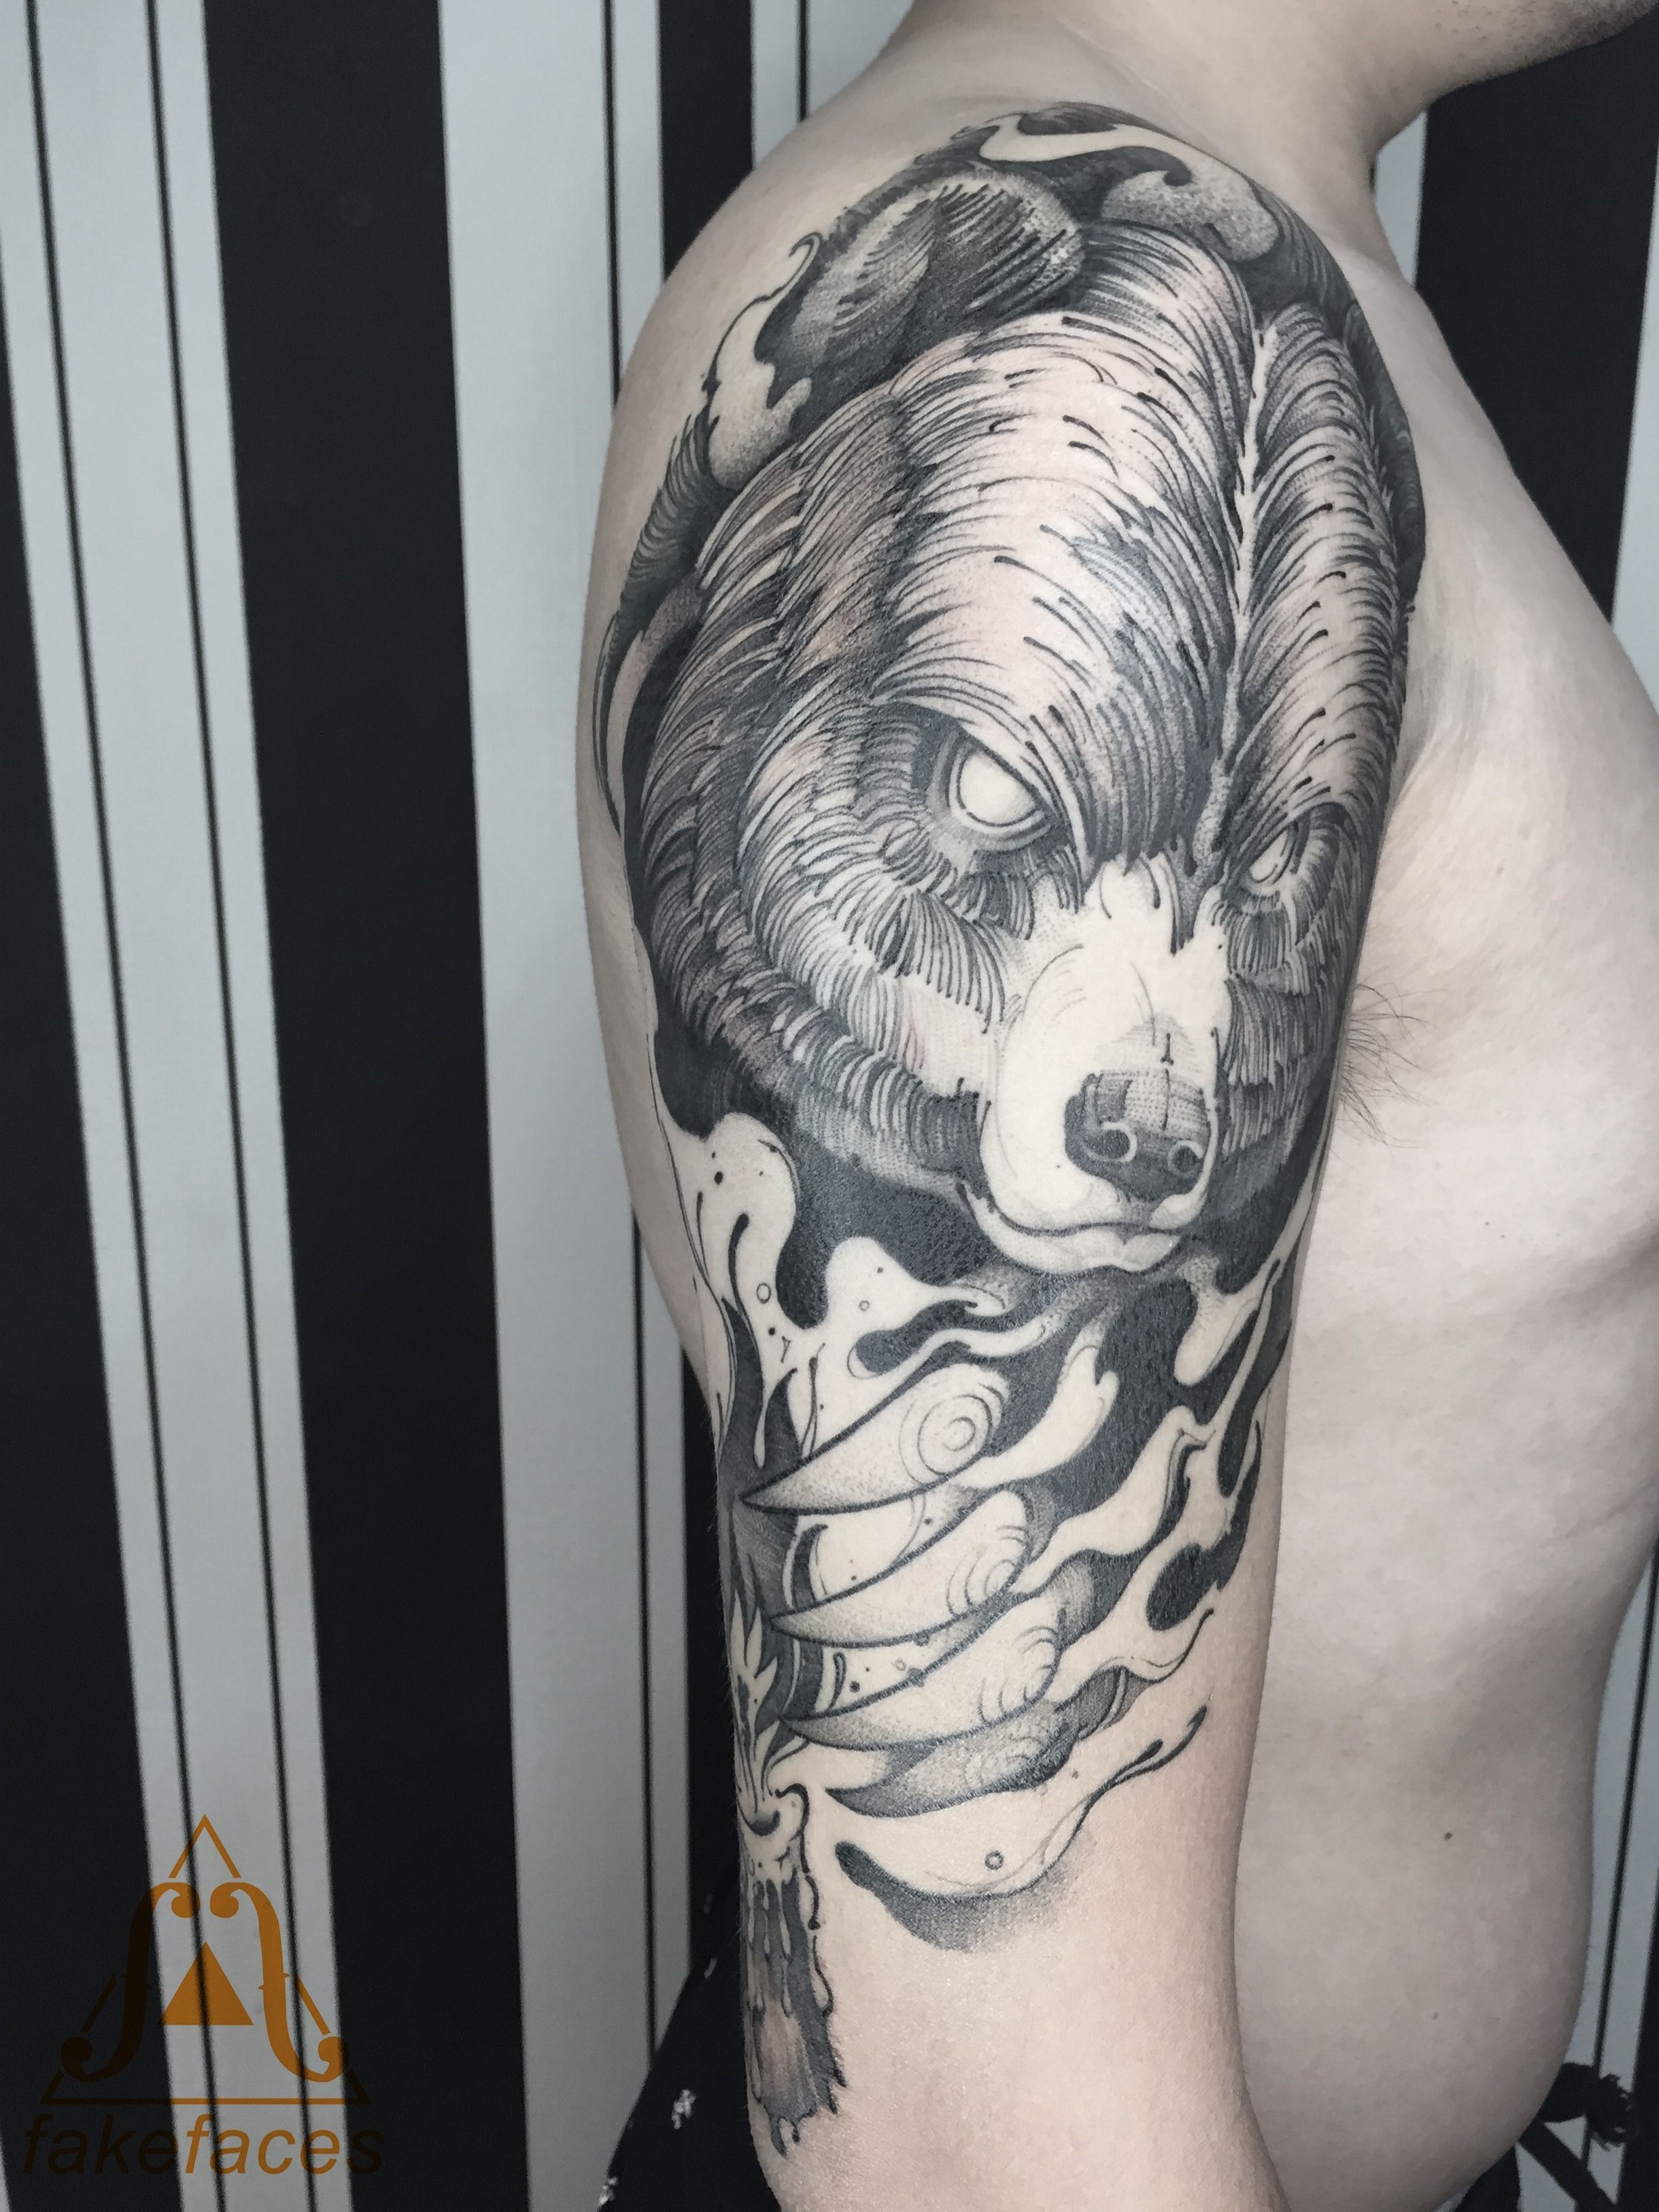 After Inked na Twitterze Lets enjoy these spectacular bear tattoos  demonstrating their strength and power on the skin Bear BearTattoo  AnimalTattoo BigAnimal WildLife afterinked proudusers  formulatedforperfection afterinkedeveryday 